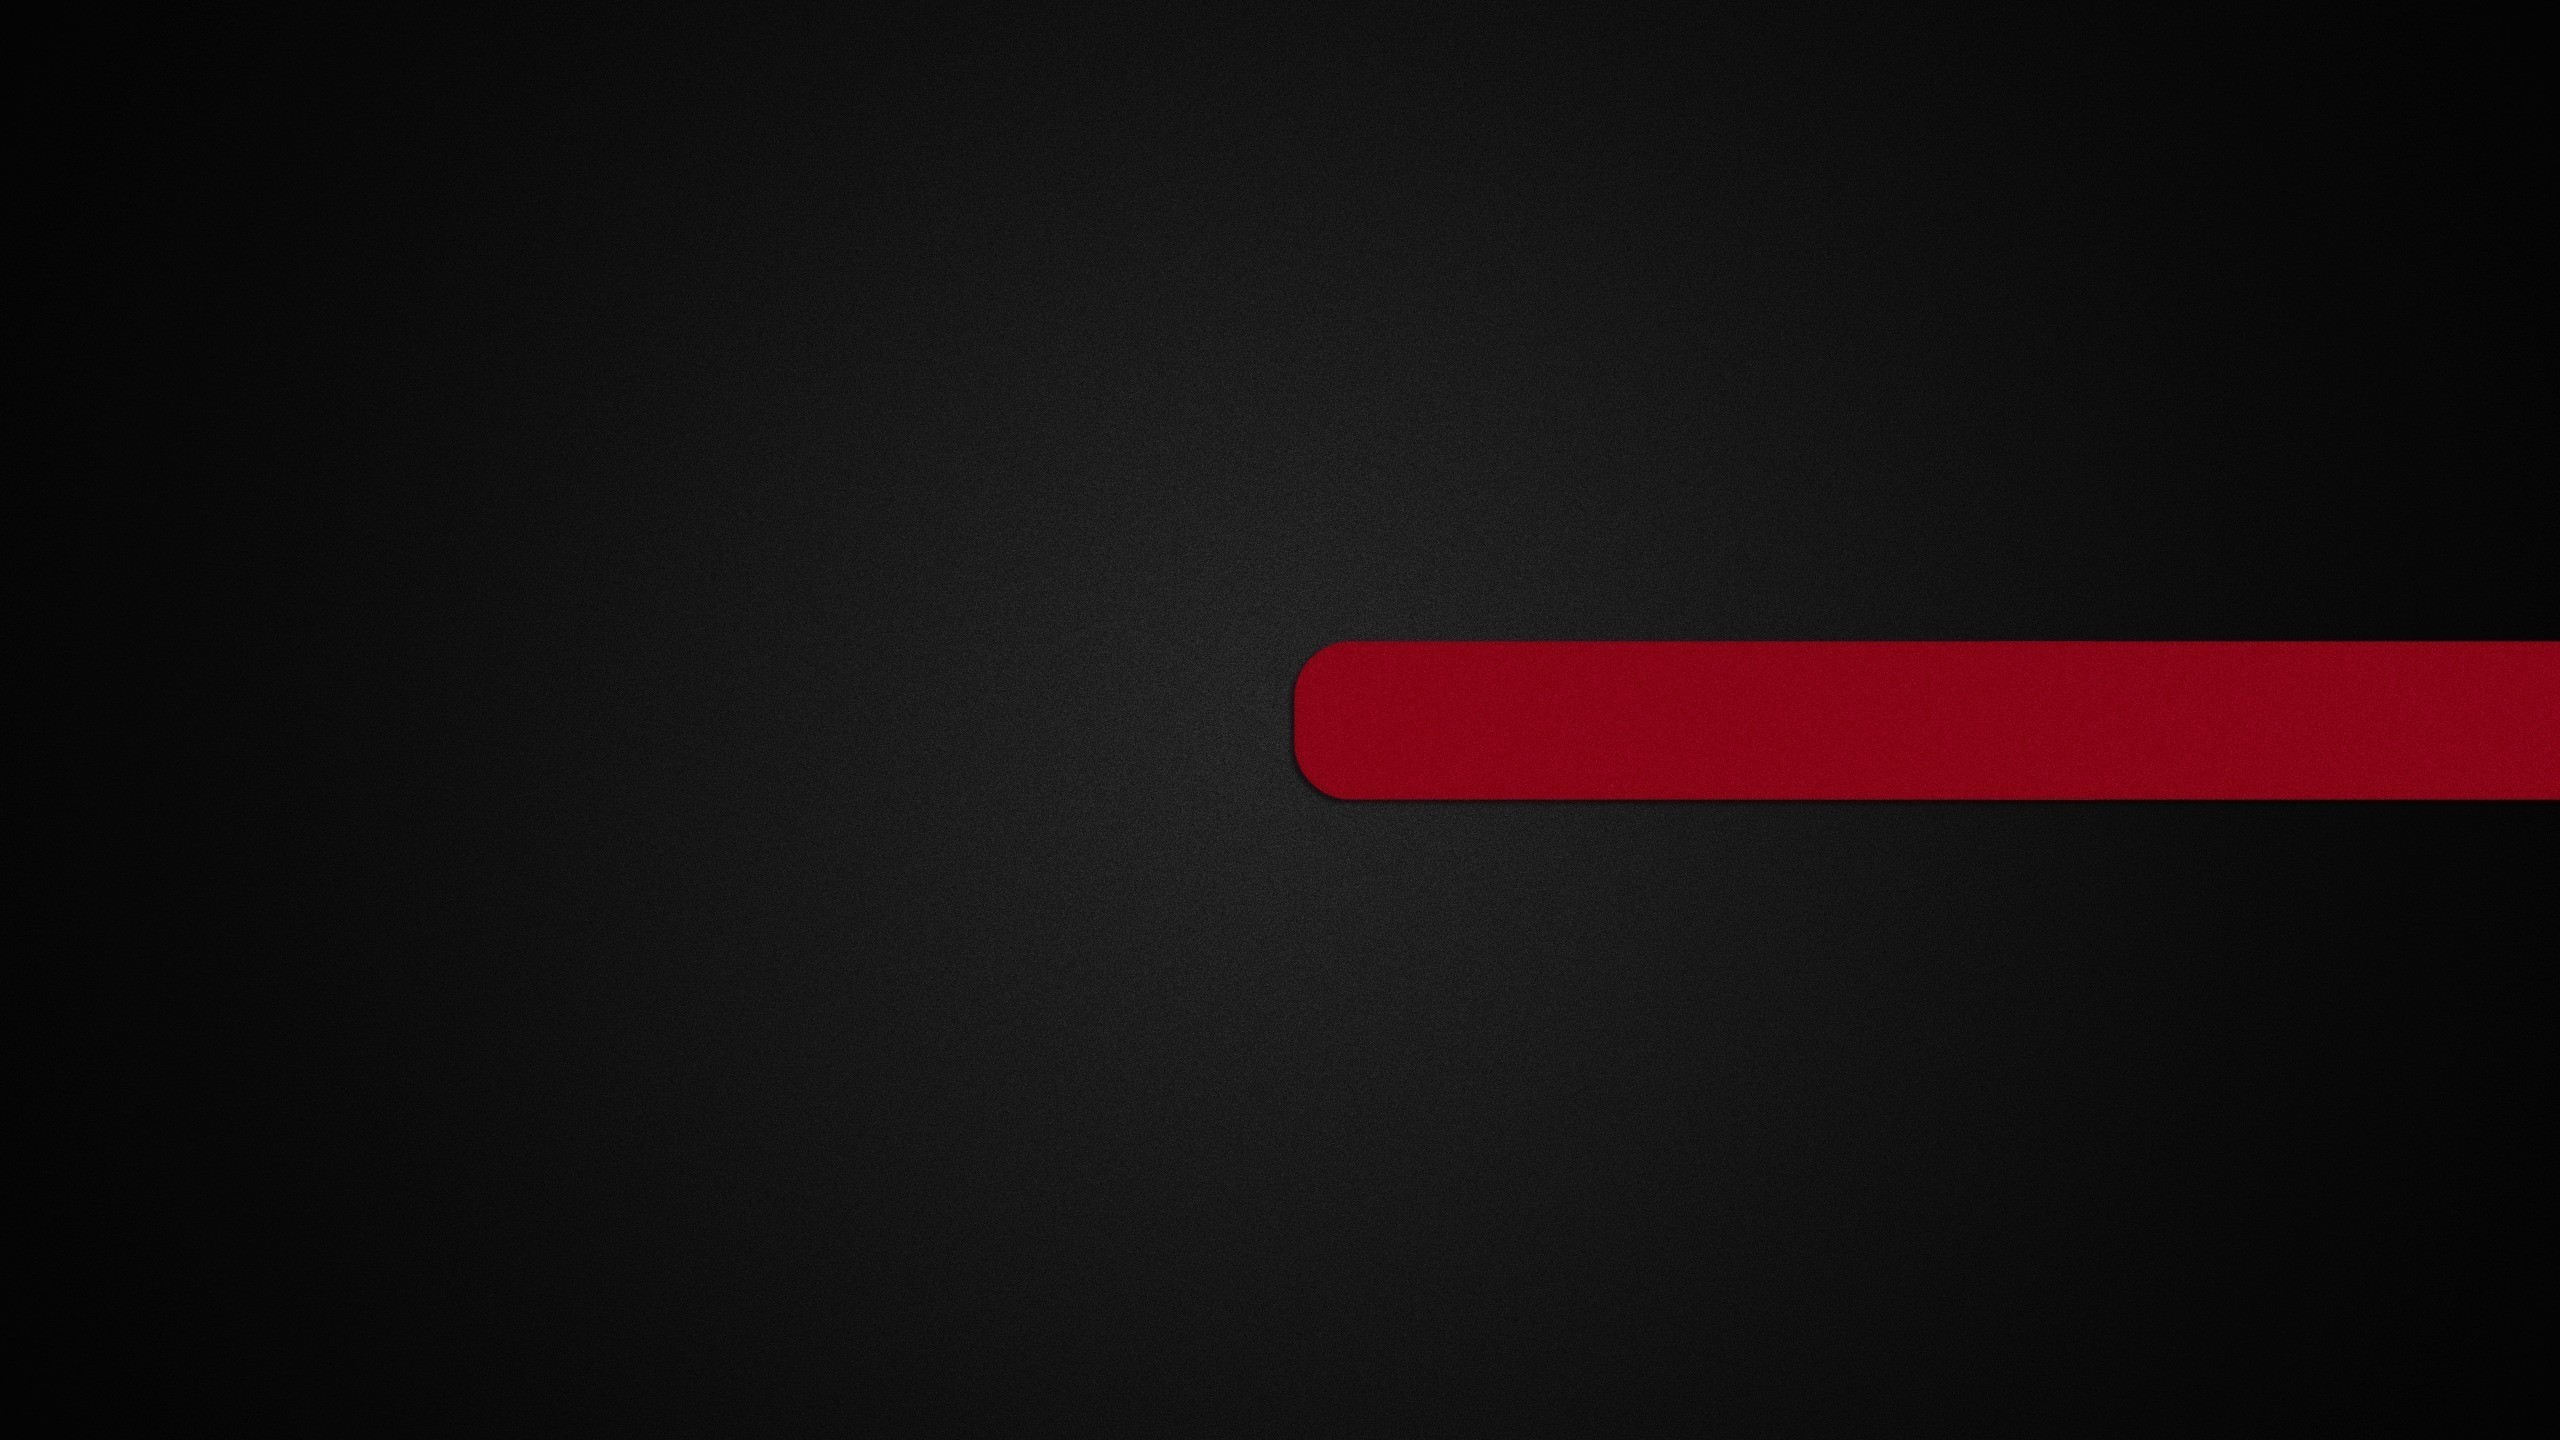 2560x1440 wallpaper.wiki-Red-black-awesome-wallpaper-gallery-PIC-